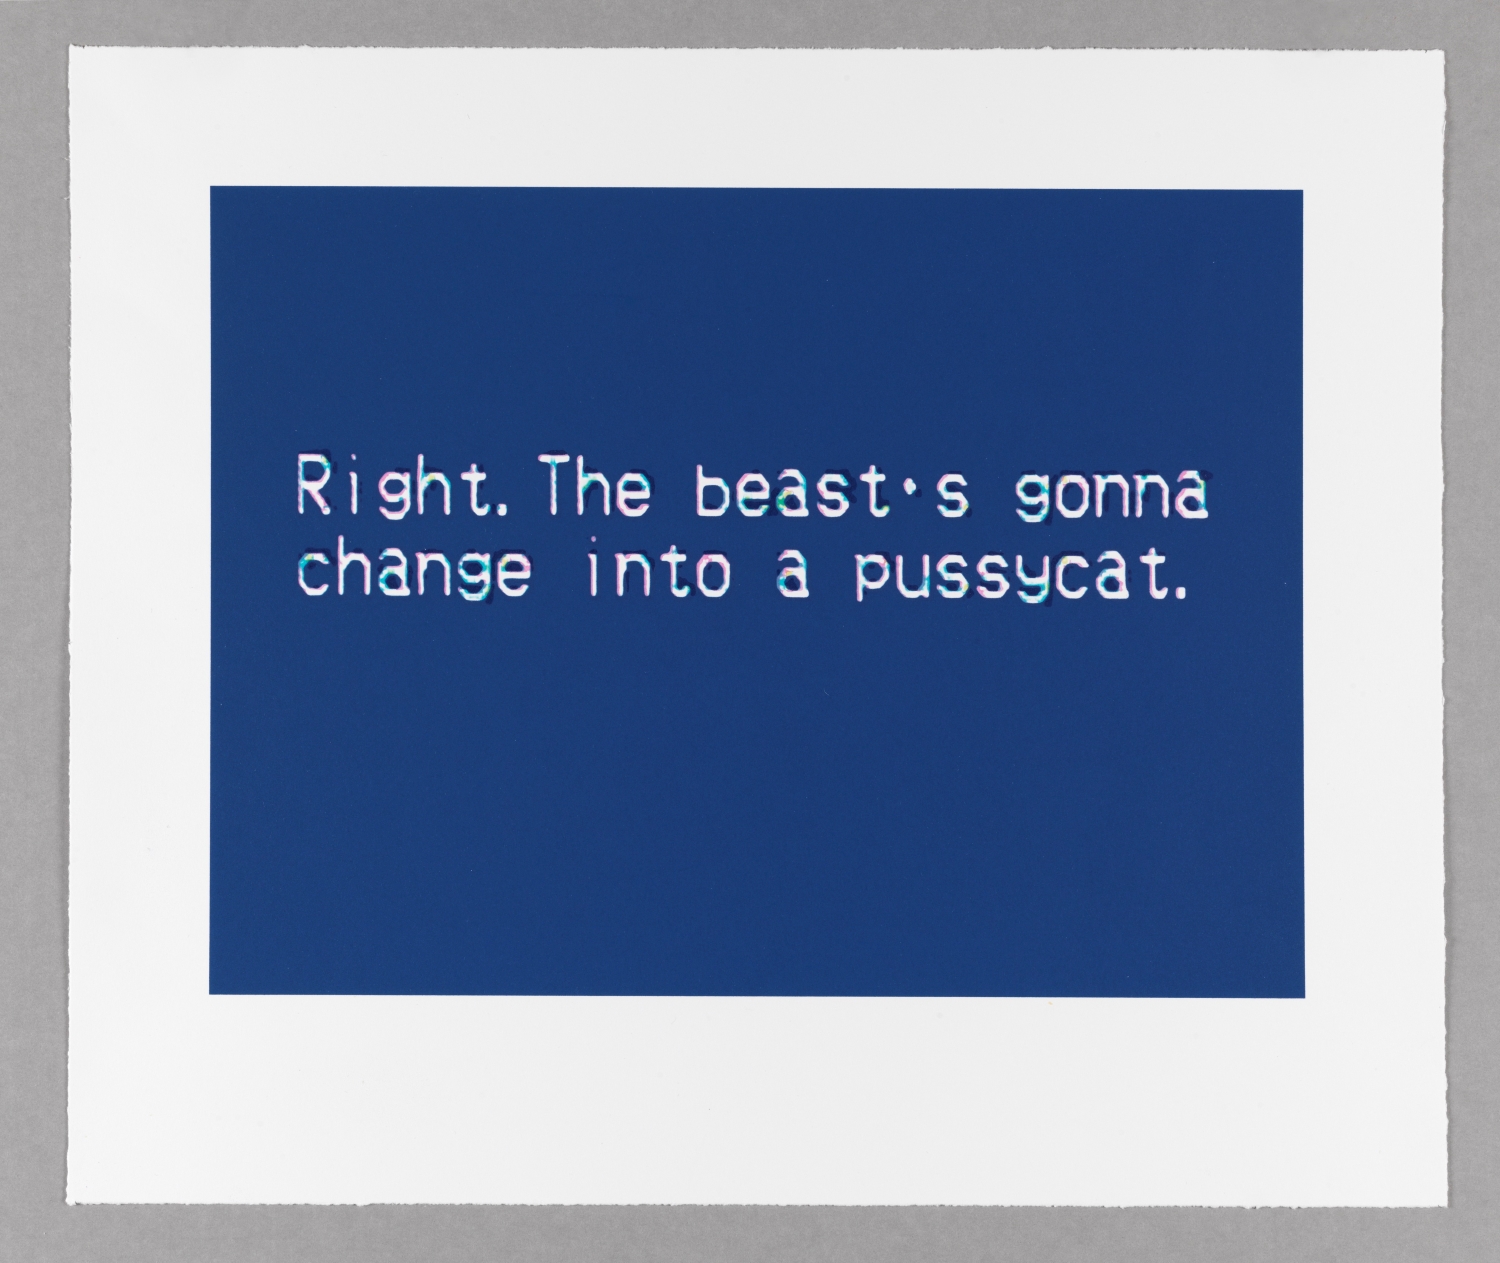 The Nature of the Beast, Pussycat